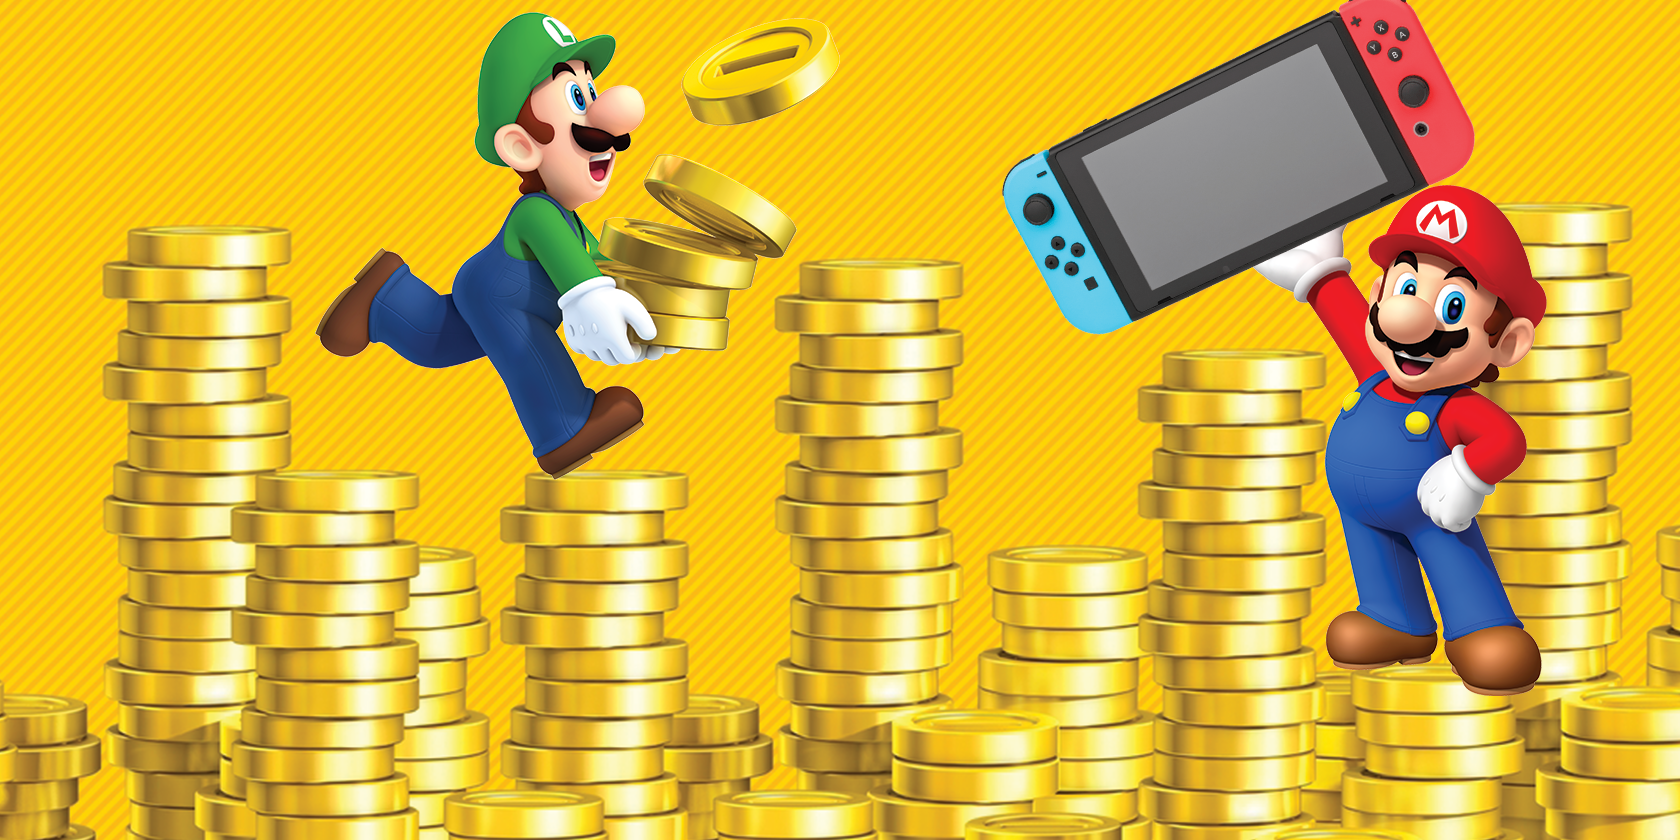 mario luigi coins and switch console